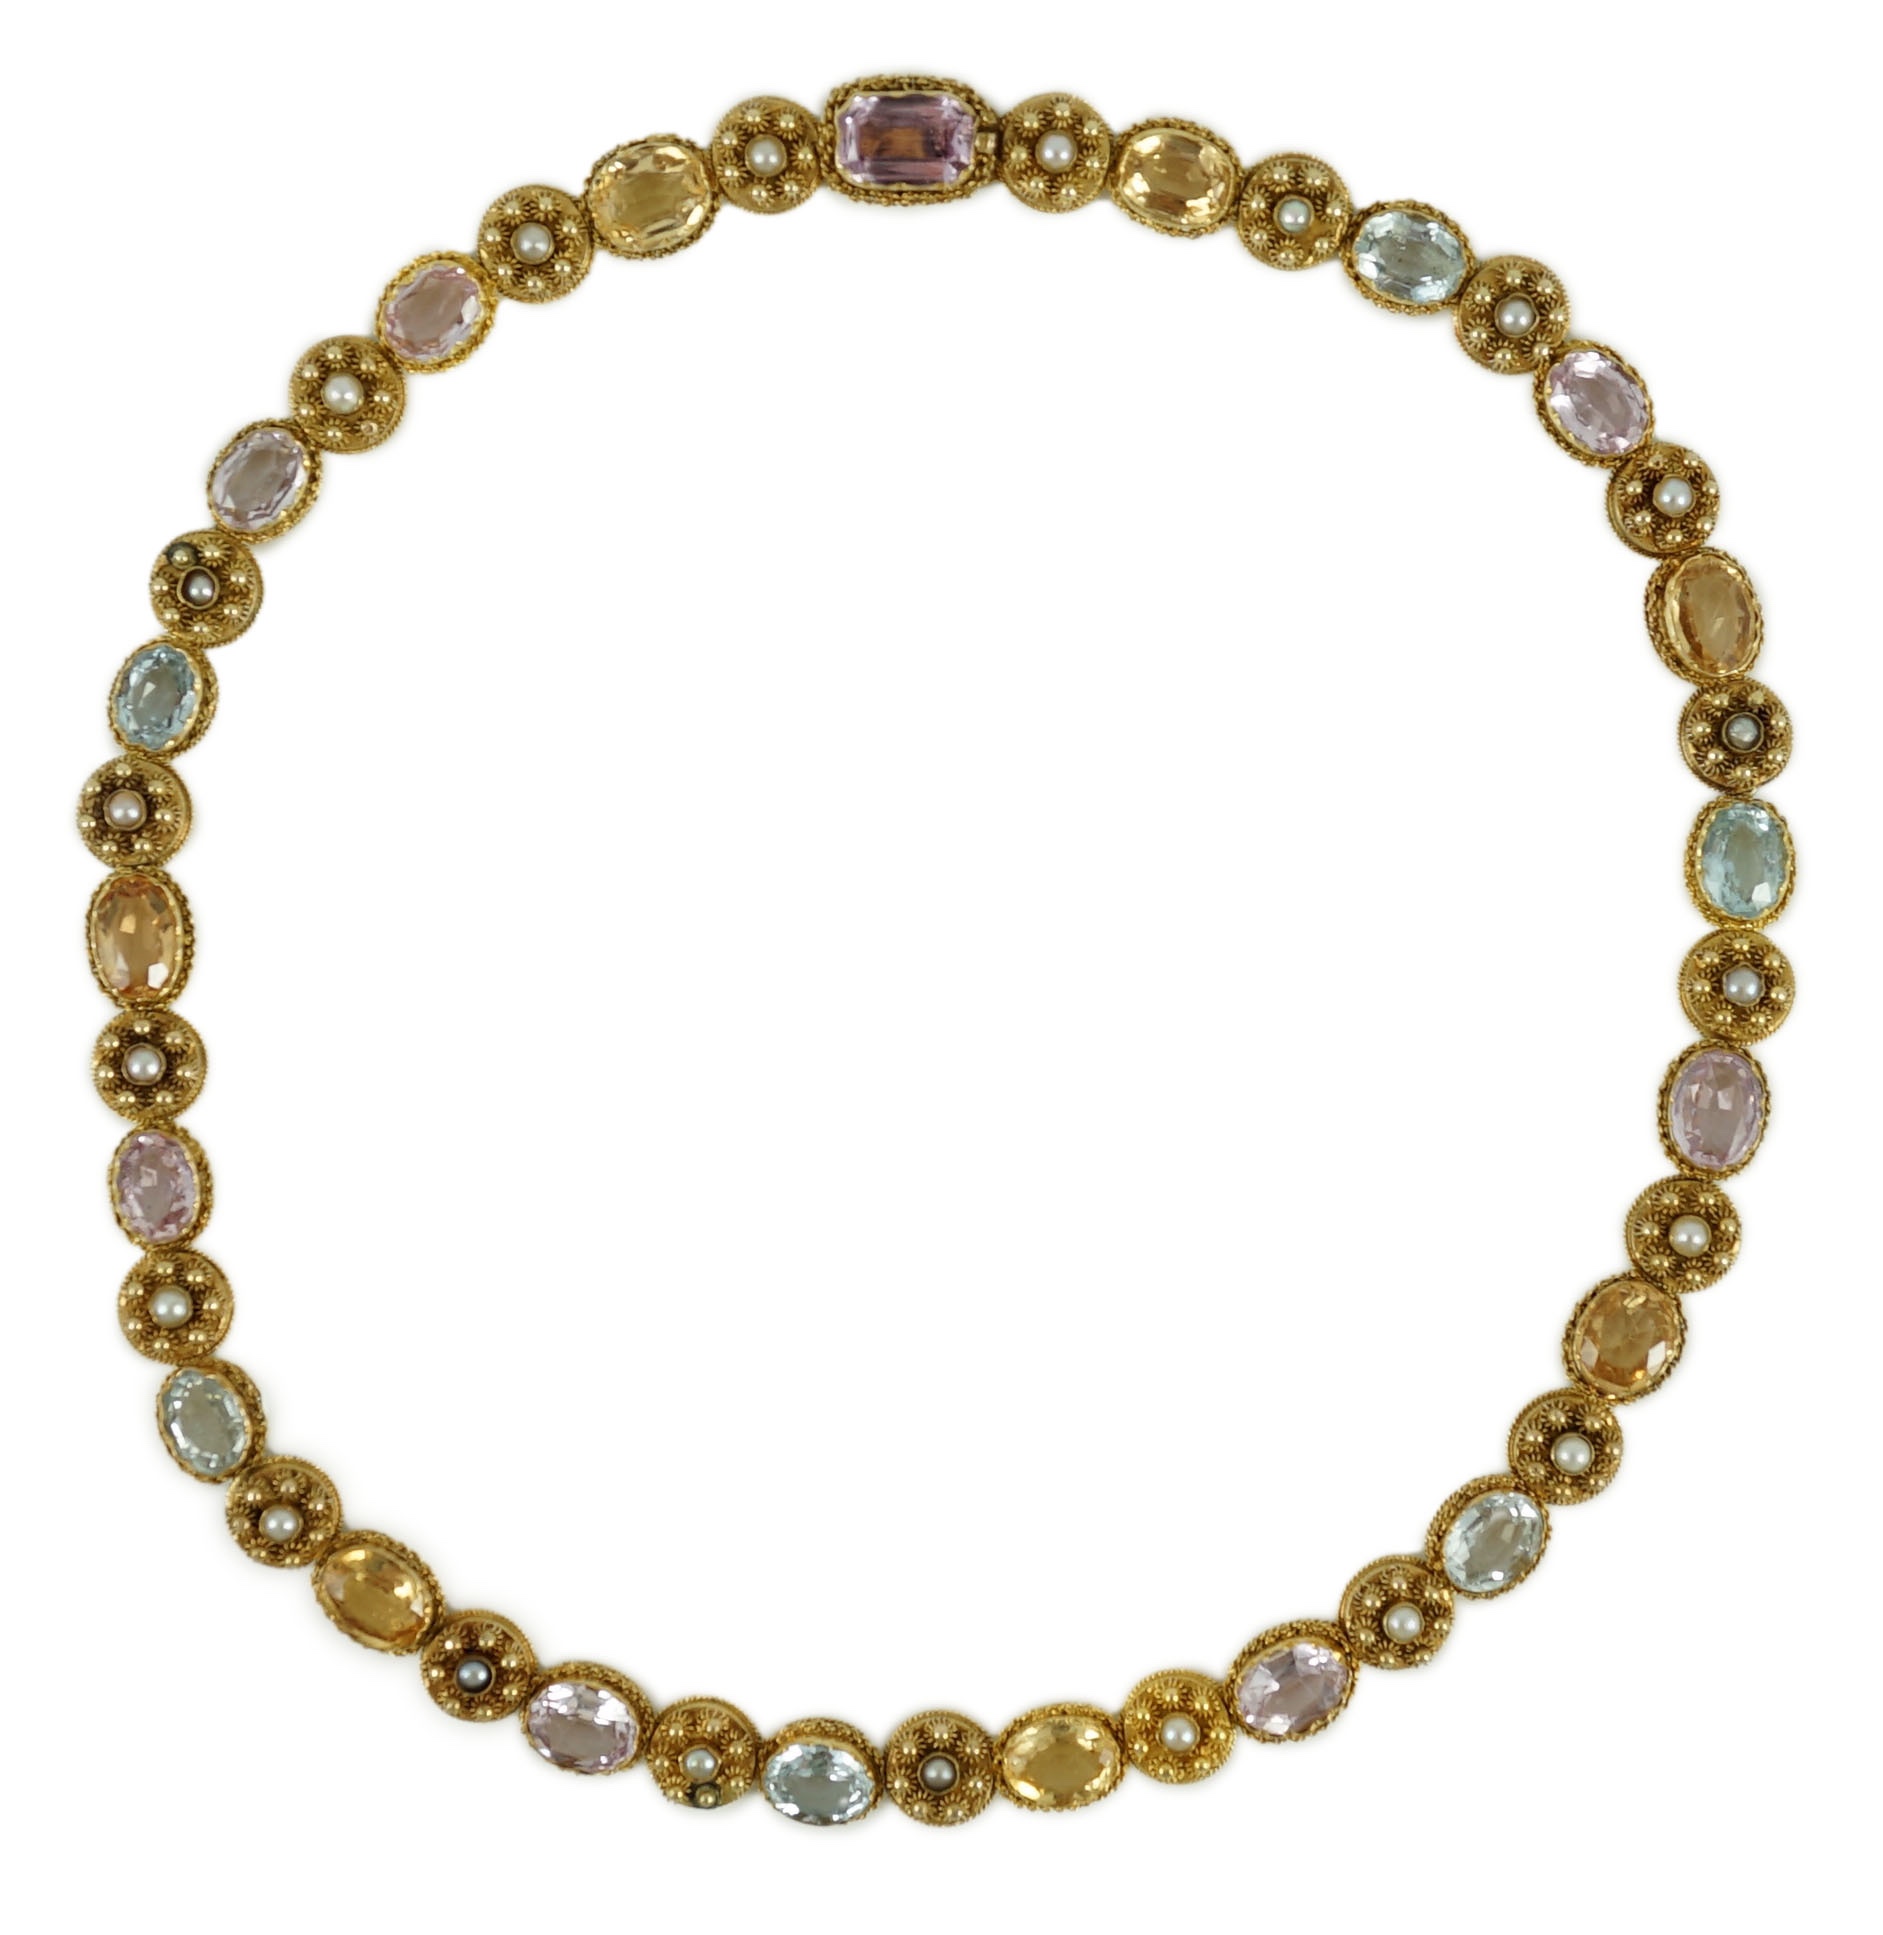 A 19th century gold, pink topaz, seed pearl, citrine and aquamarine set choker necklace